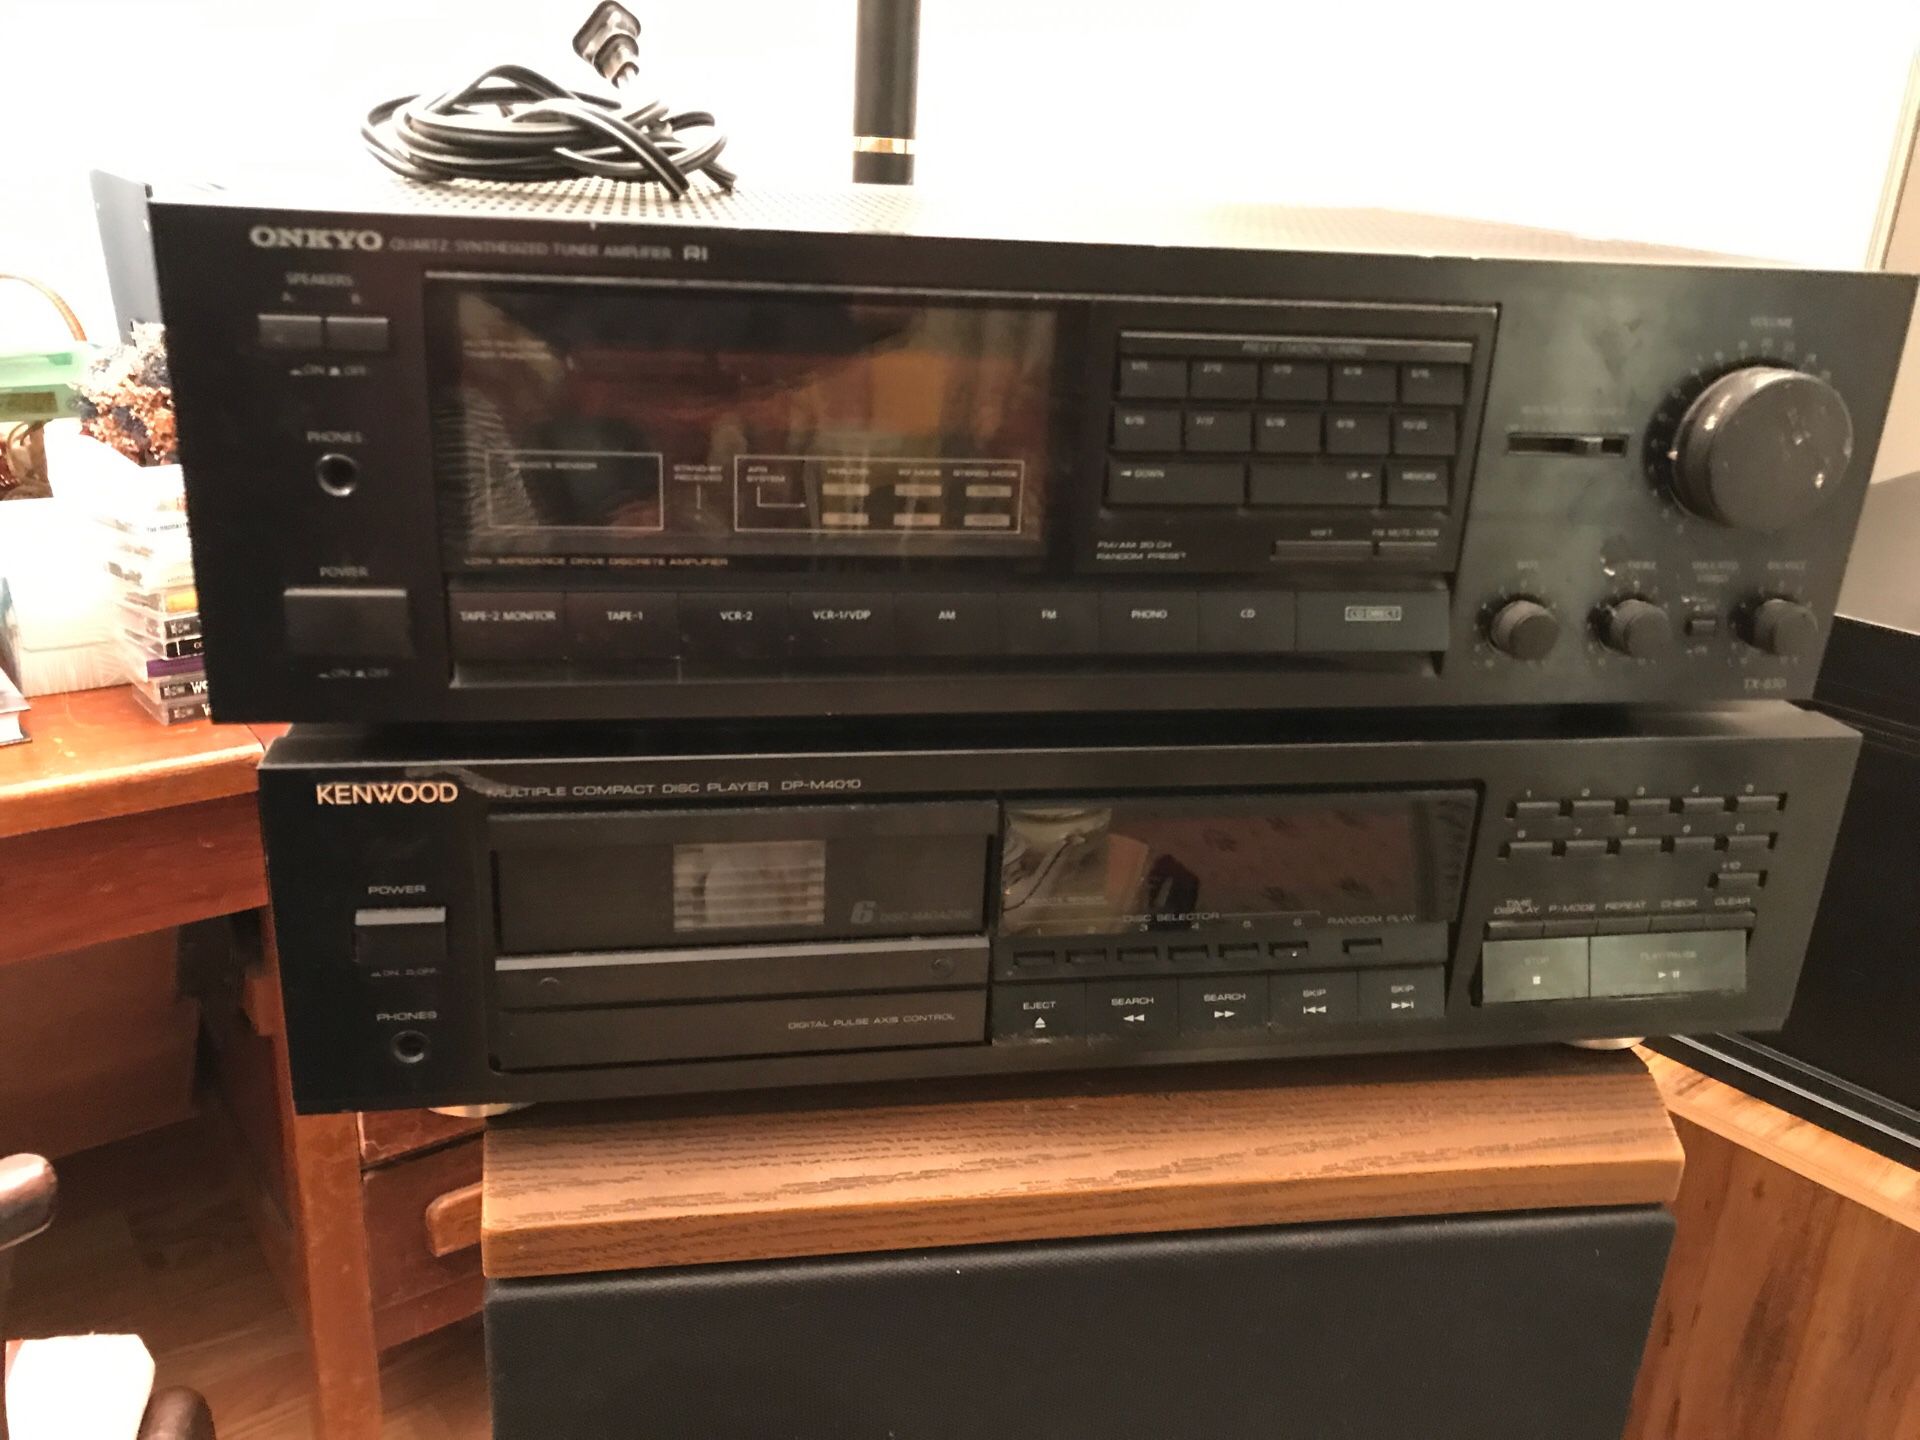 Onkyo tuner/amplifier and Kenwood multiple CD player